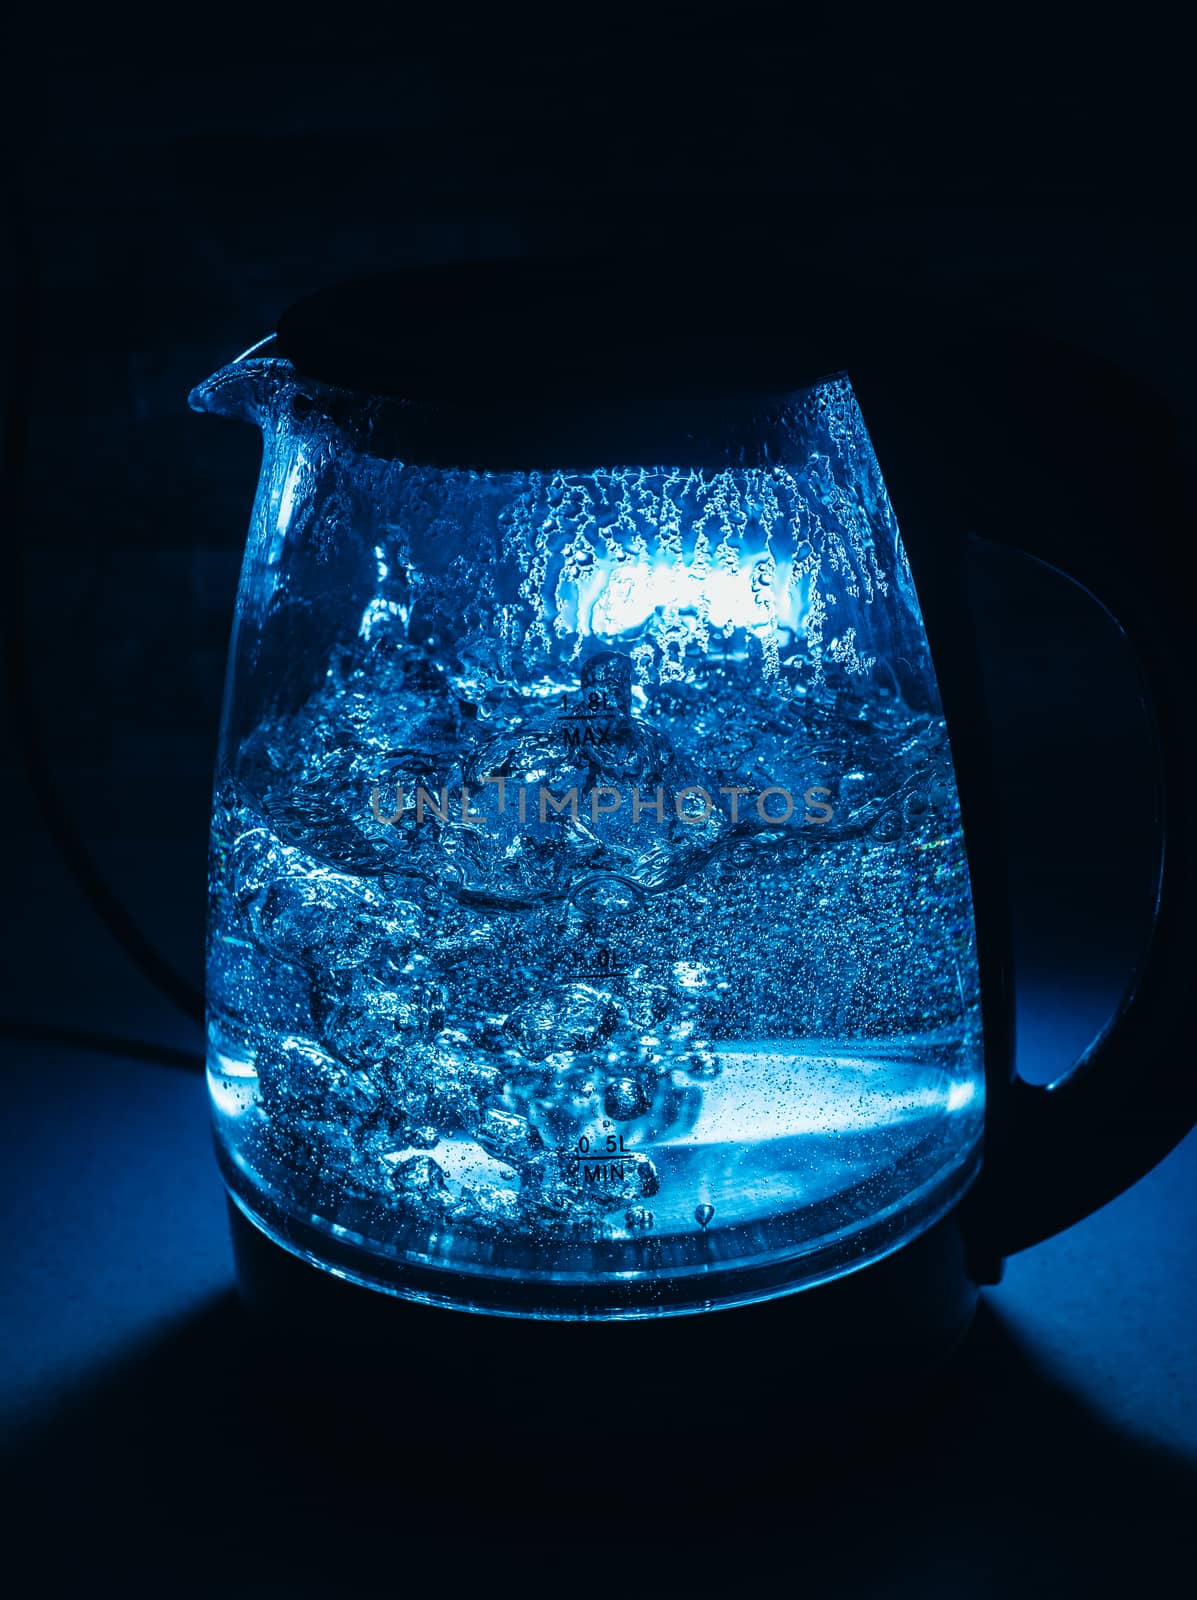 Boiling glass black teapot with blue backlight on a black background. Boiling water. Hot water is seething. Bubbles of air in the water.